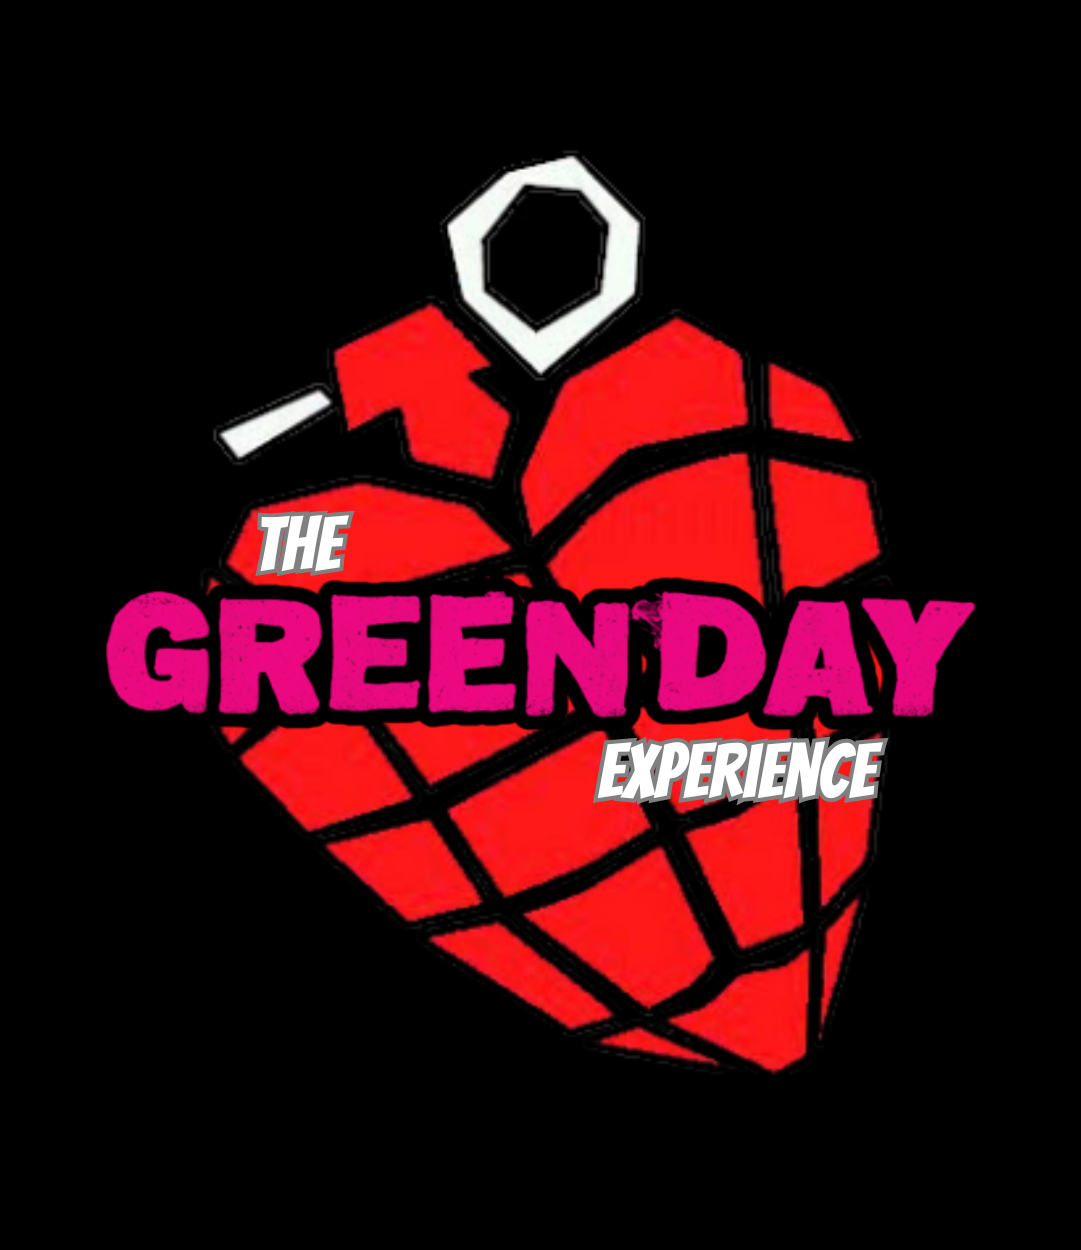 The Green Day Experience